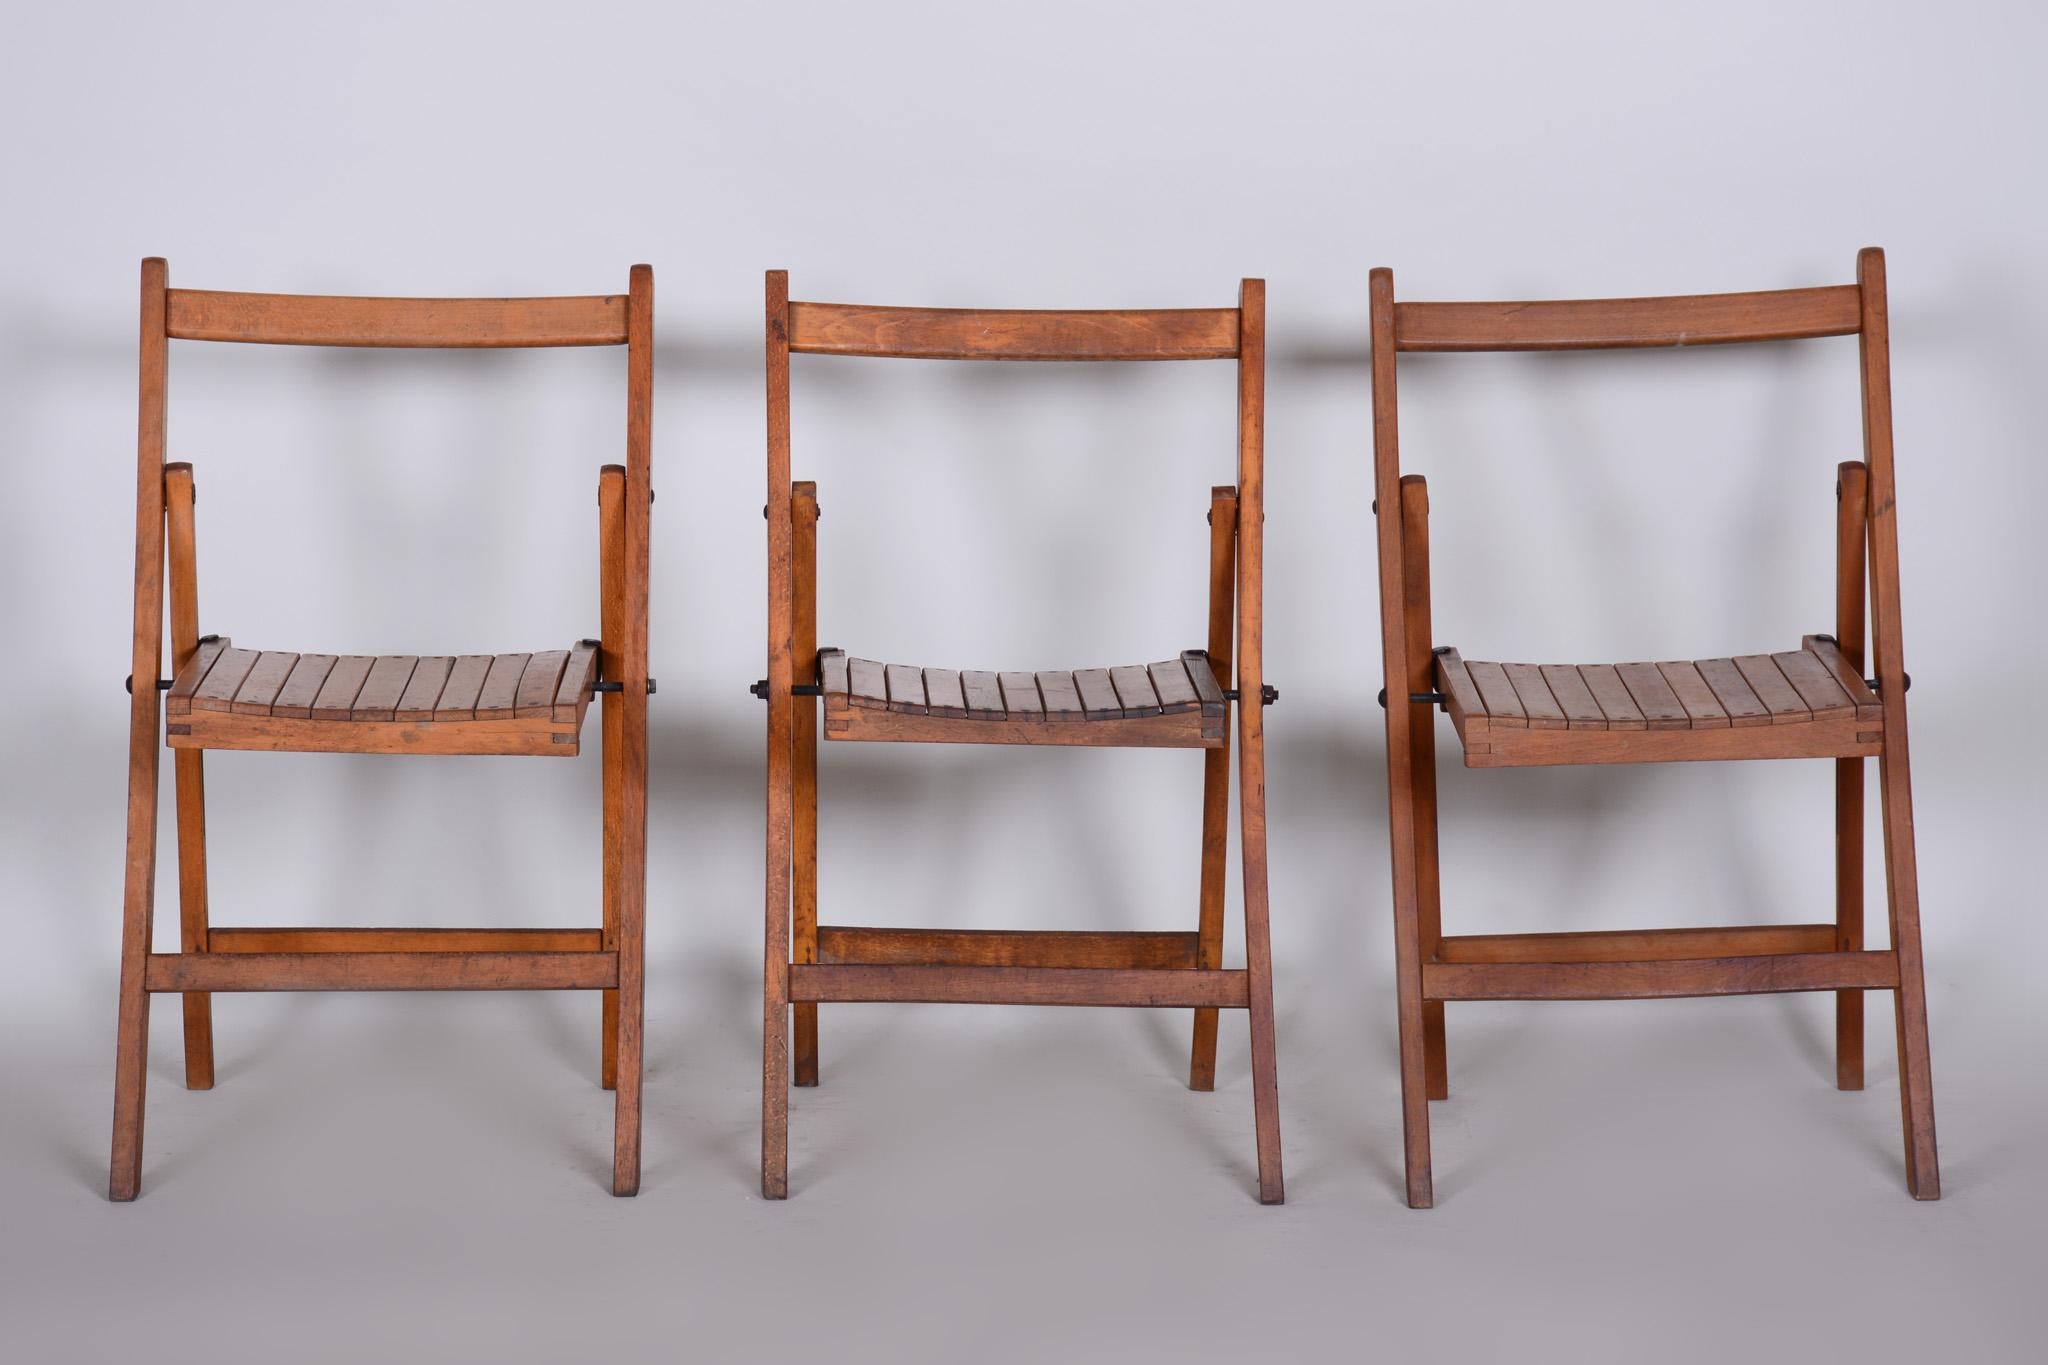 Czech Midcentury Beech Chairs, Original Condition, 1950s, 3 Pieces For Sale 5